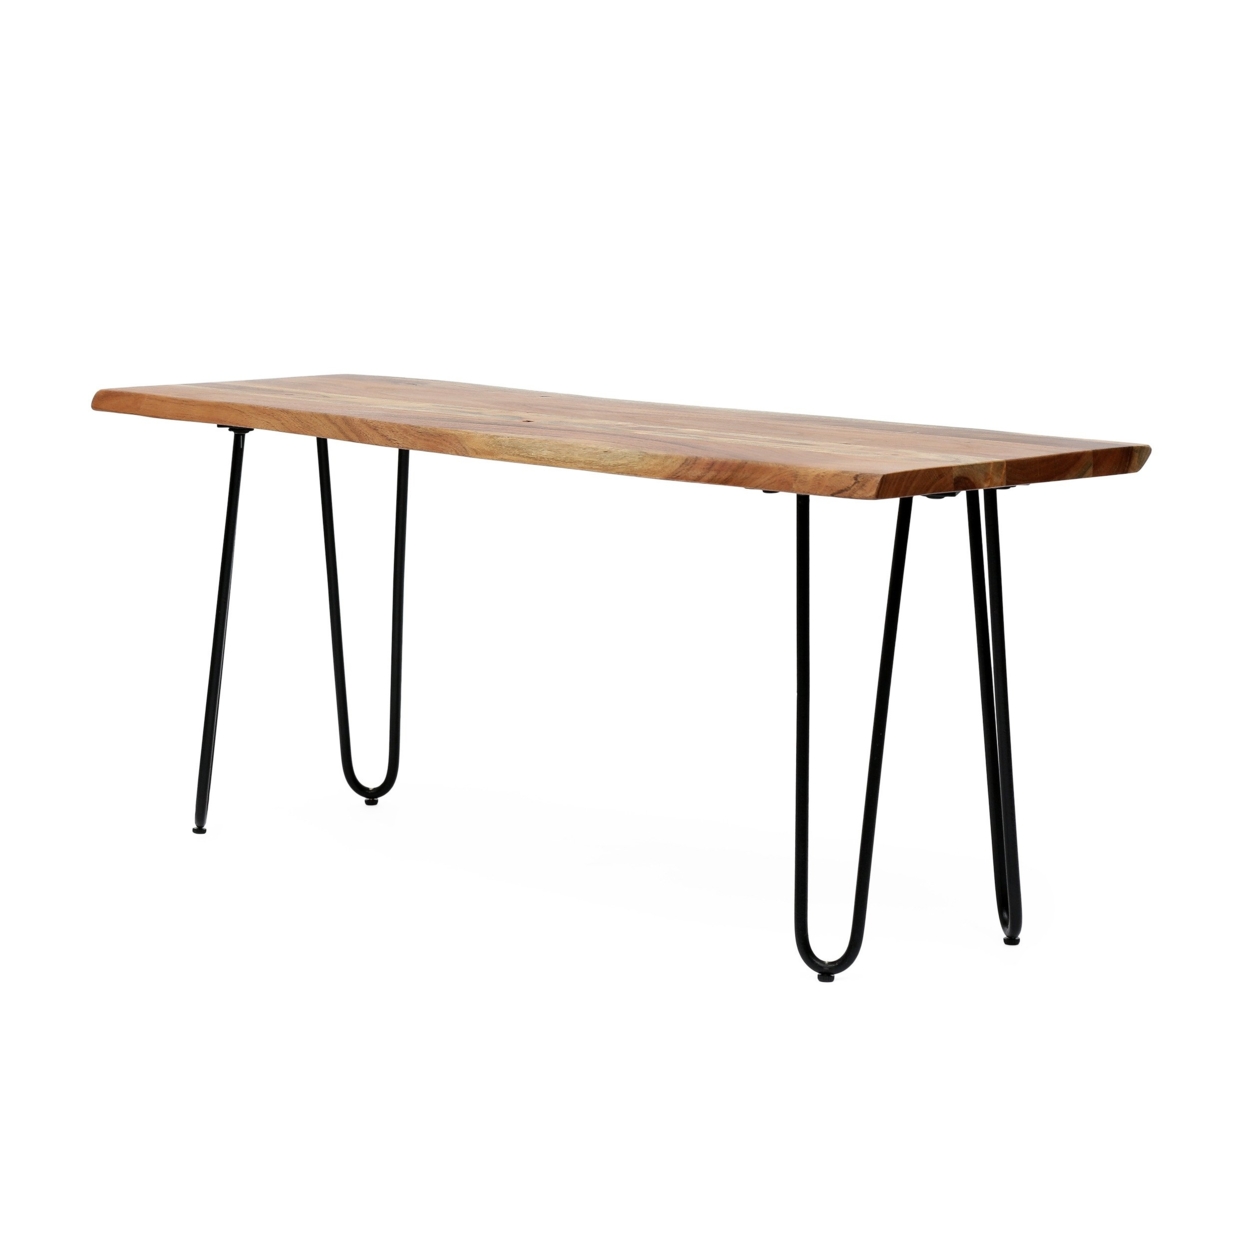 Bullard Handcrafted Modern Industrial Acacia Wood Dining Bench With Hairpin Legs